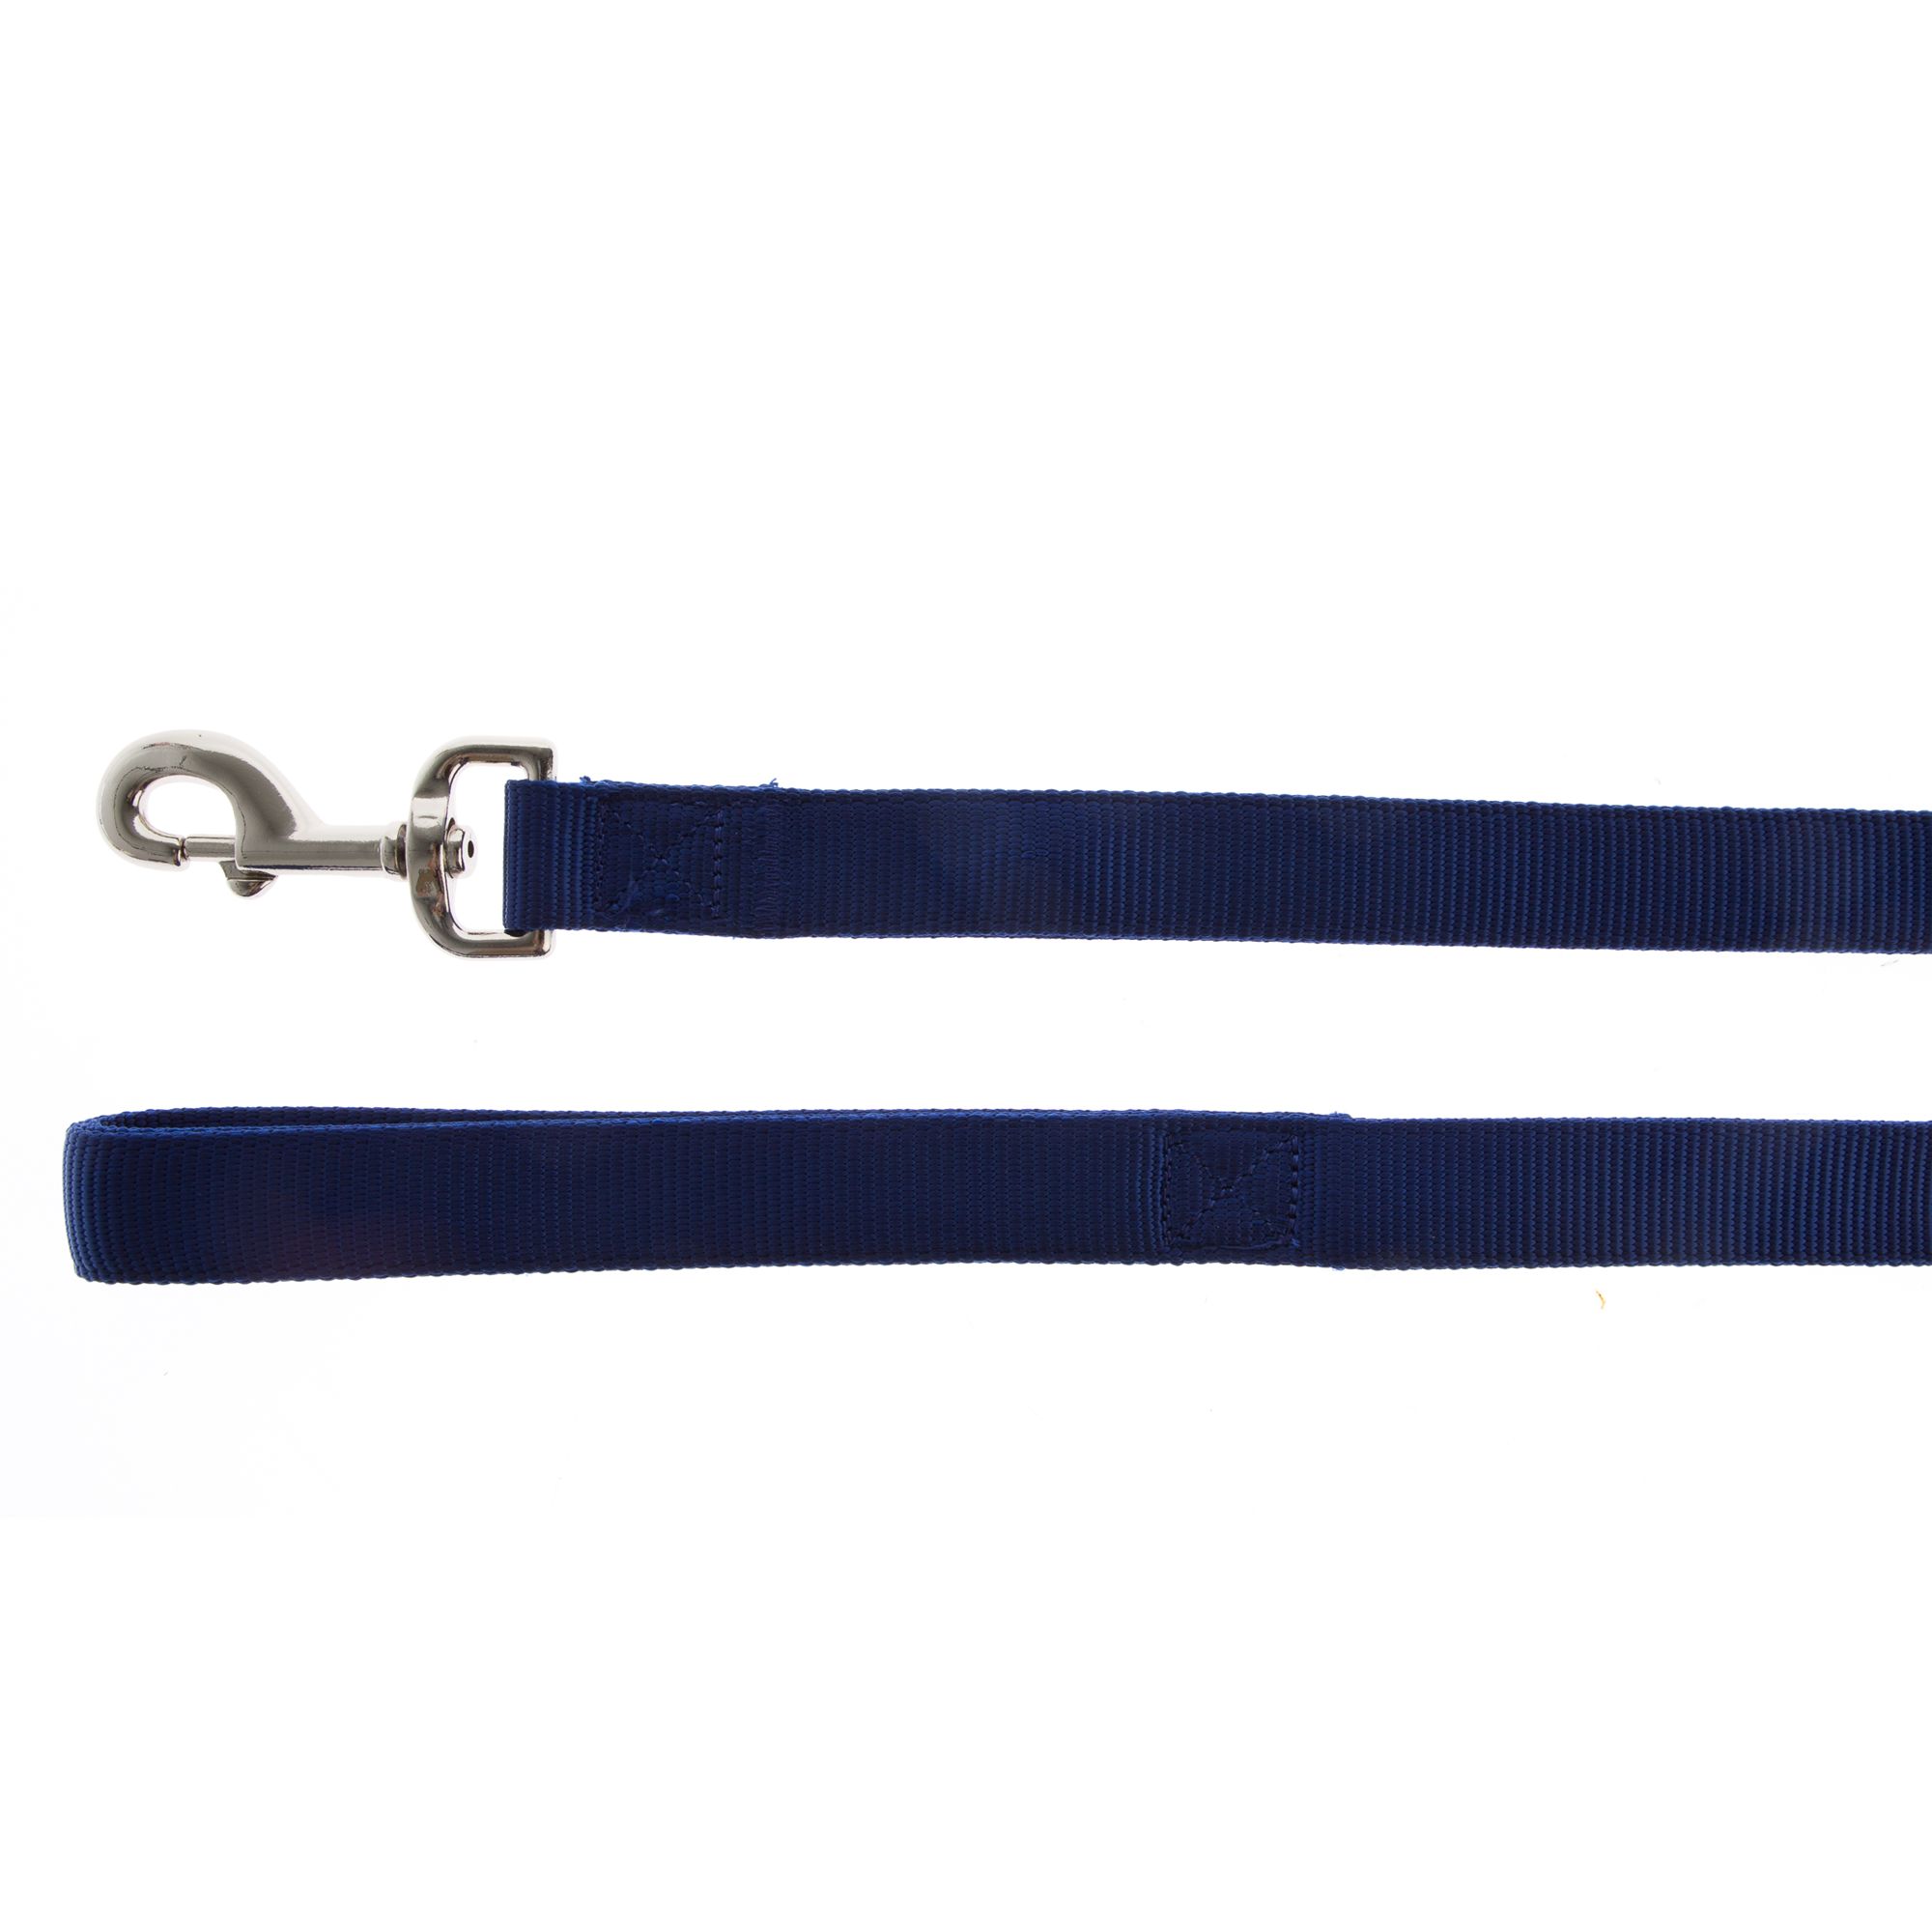 Top Paw® Double Nylon Dog Leash: 6-ft long, 1-in wide